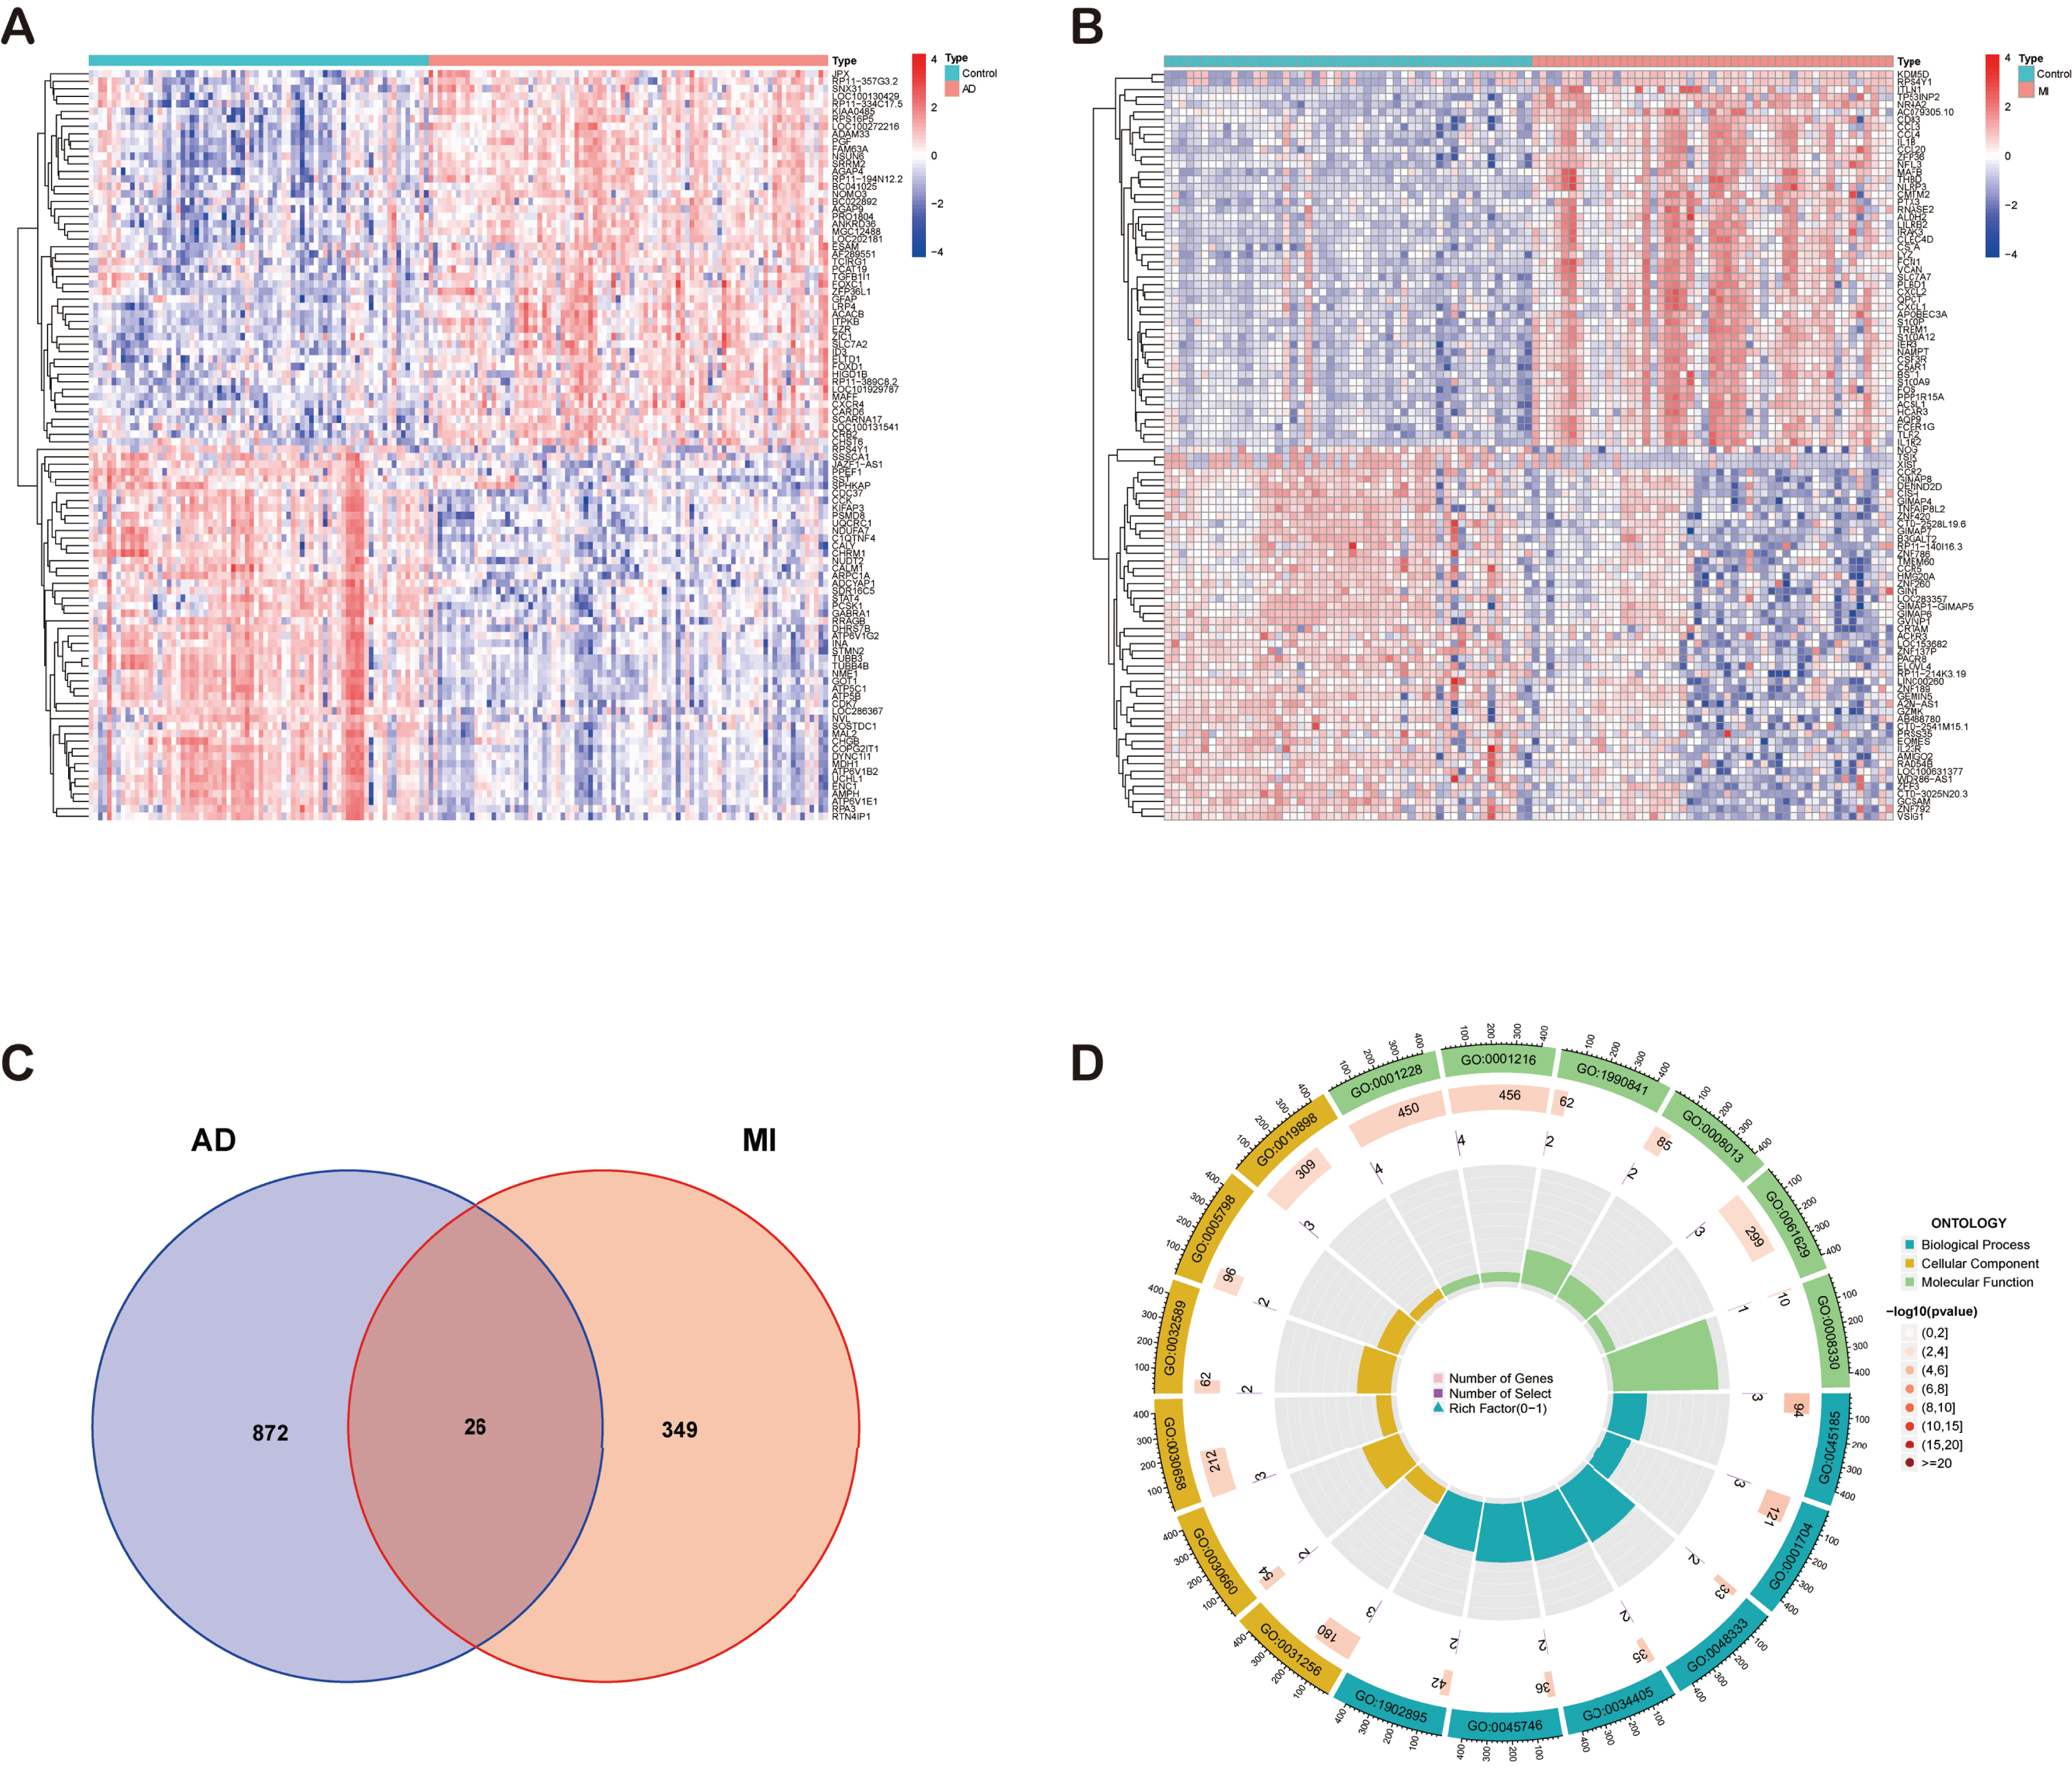 A) Heatmap of DEGs in AD. B) Heatmap of DEGs in MI. C) Venn diagram shows that 26 genes are identified from the intersection of DEGs in MI and AD. D) Circle plot of GO enrichment analysis of common DEGs.